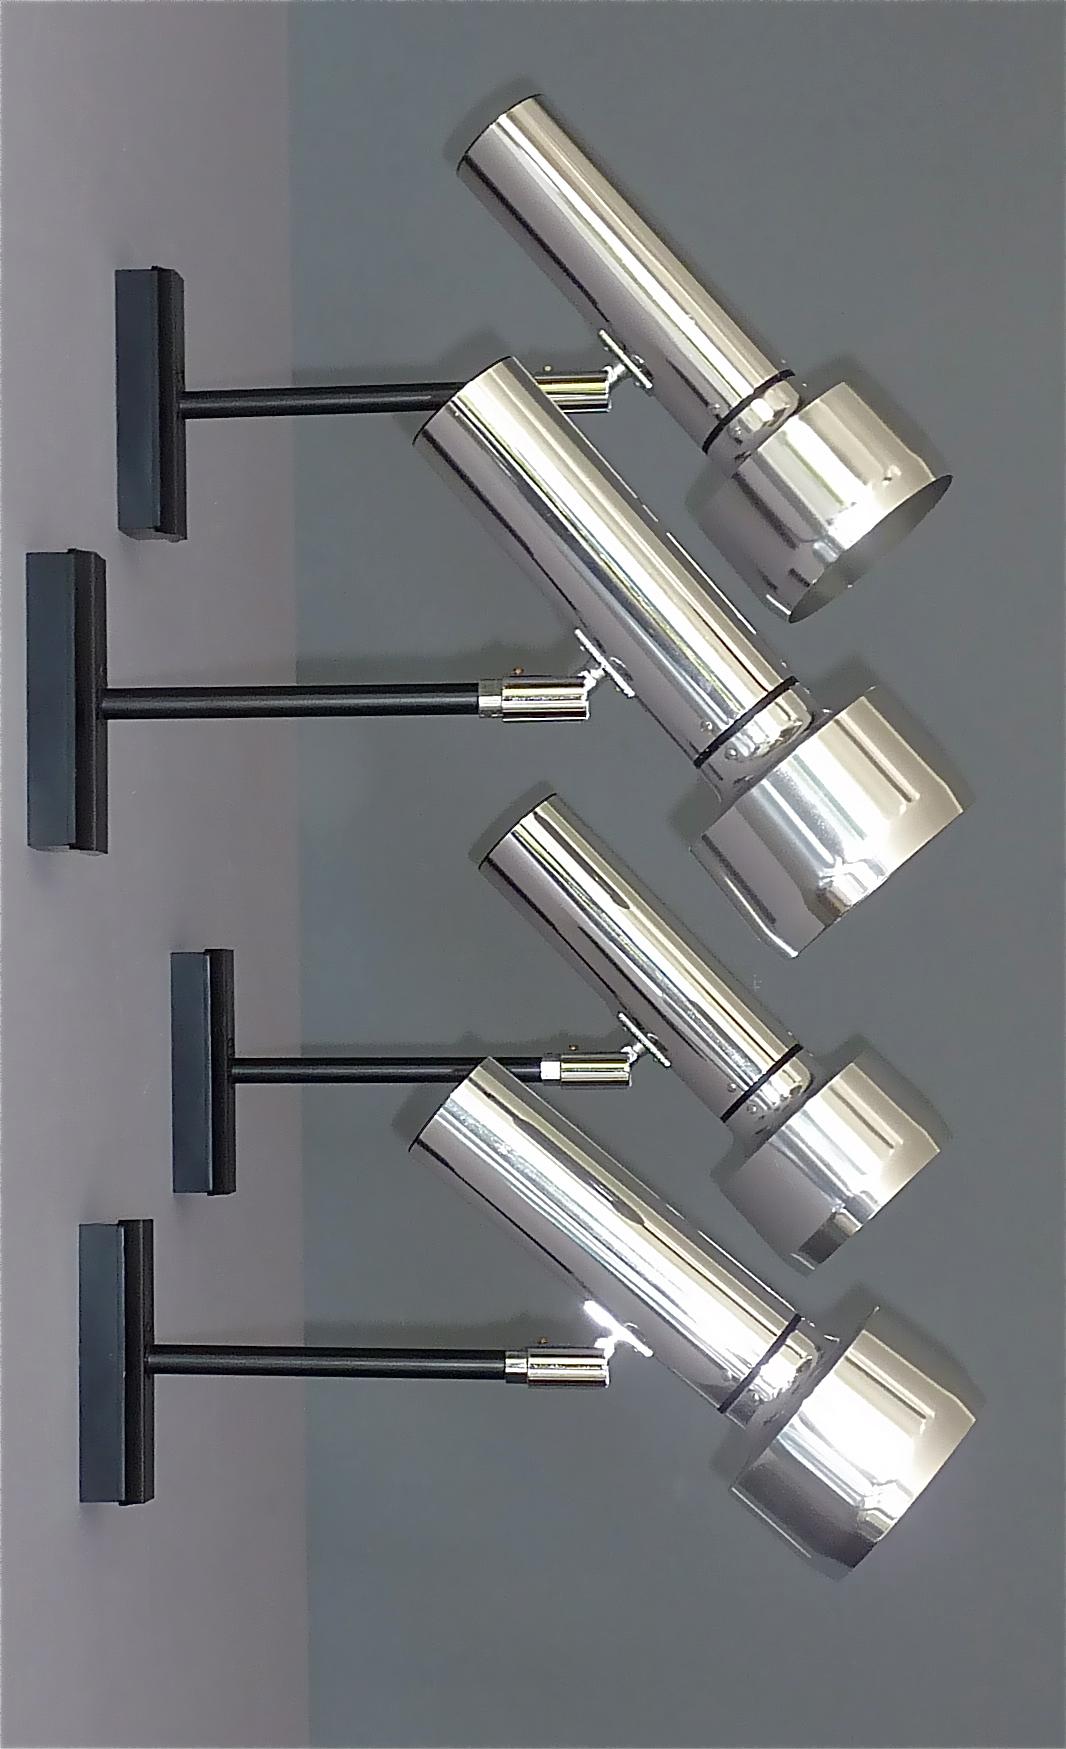 4 Wall Lights Erco Spots Ceiling Lamps Chrome Black Sarfatti Arteluce Style For Sale 4